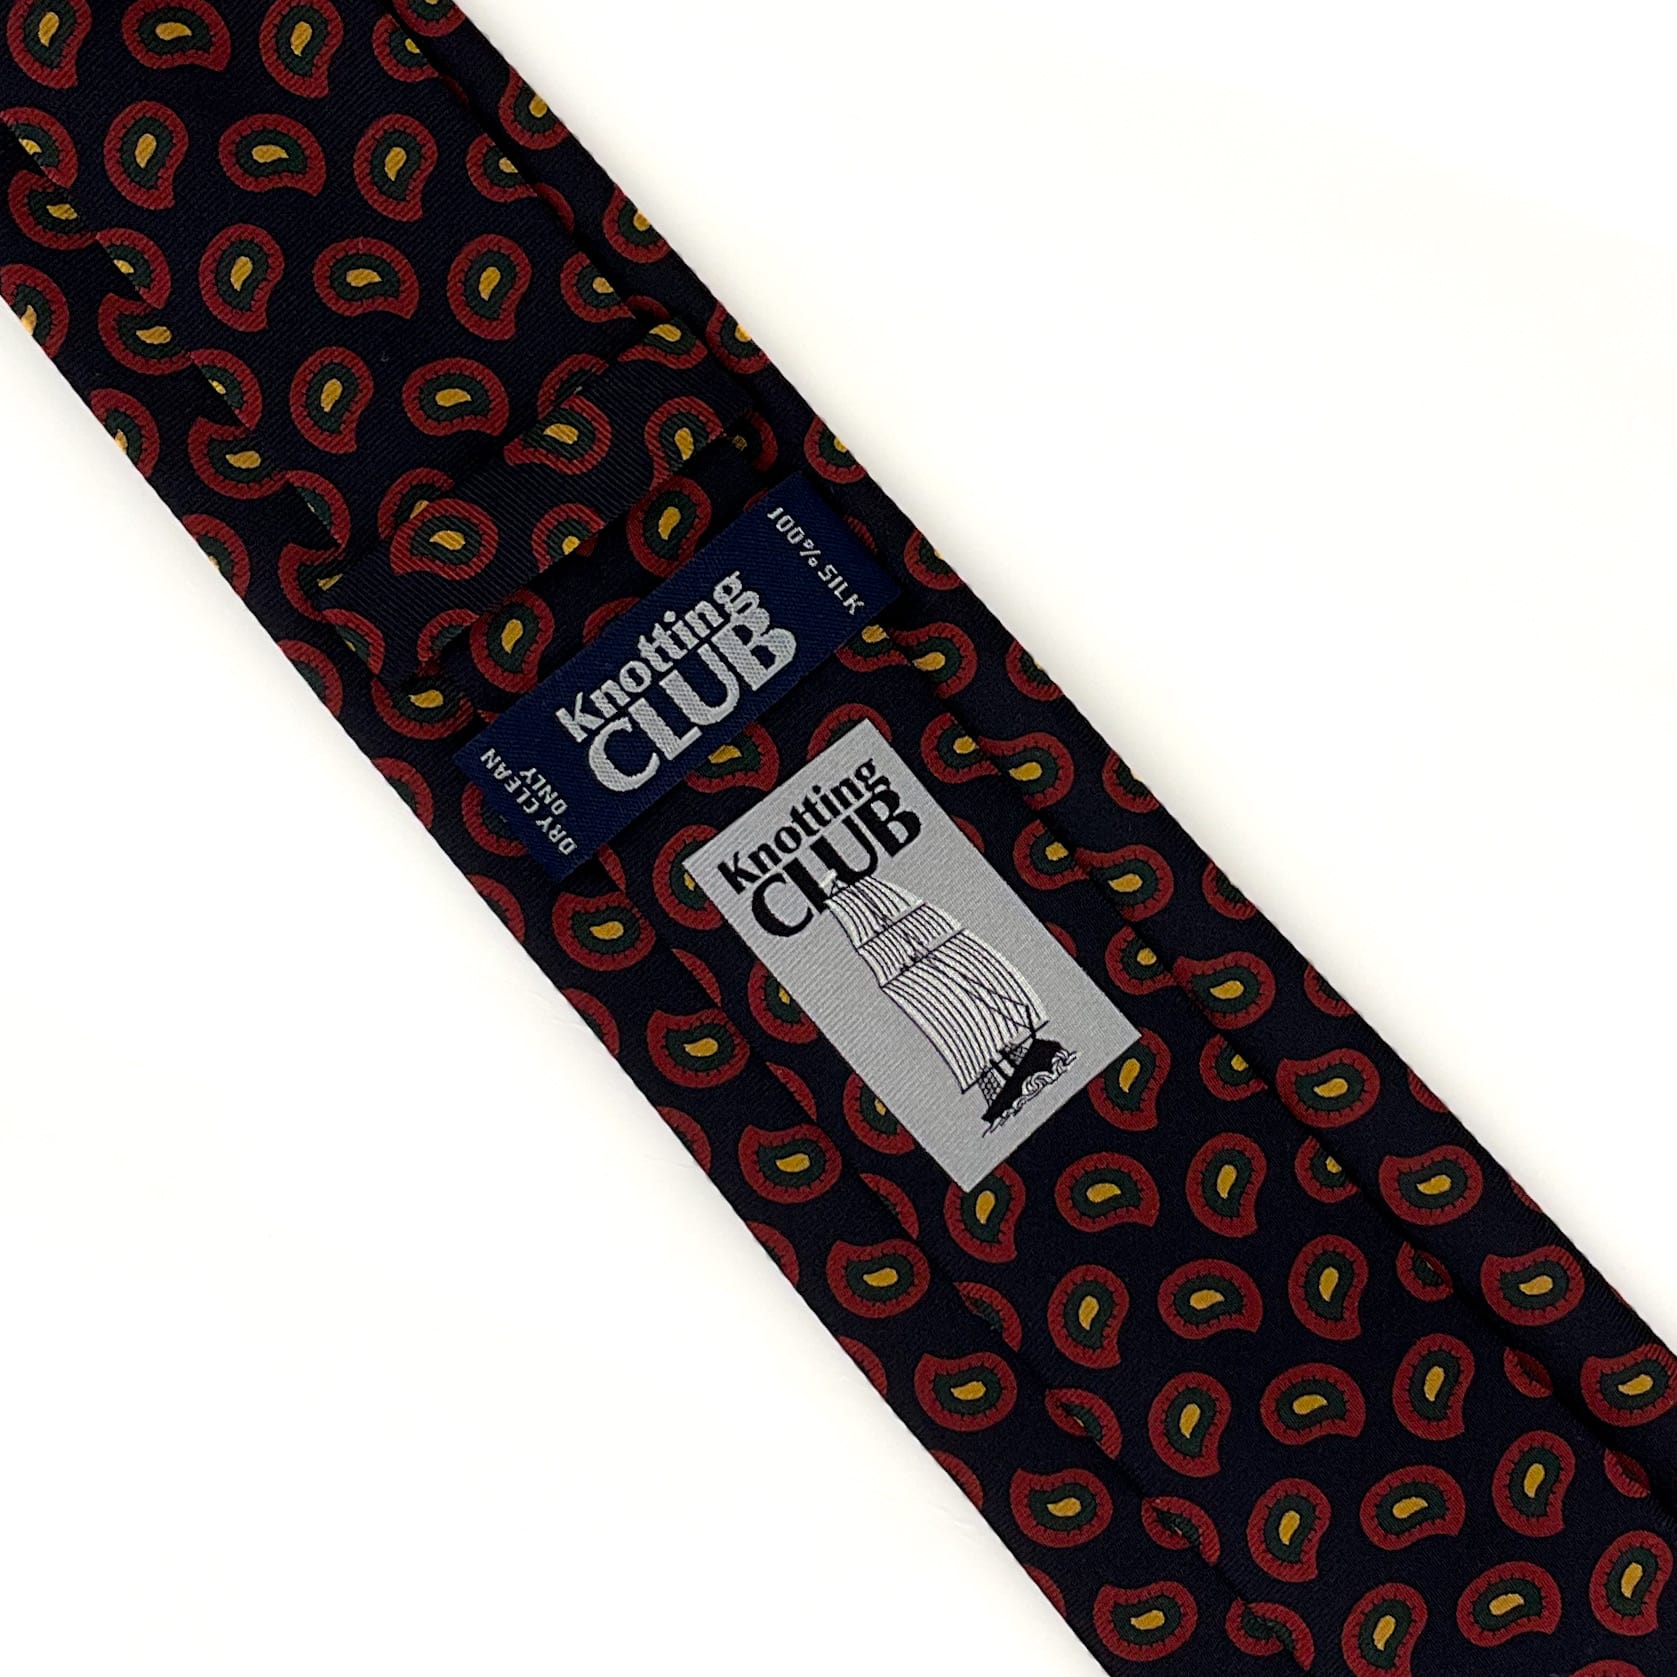 The back side of a paisley tie with a black base and red and yellow motifs. The label and logo of the brand are also visible.